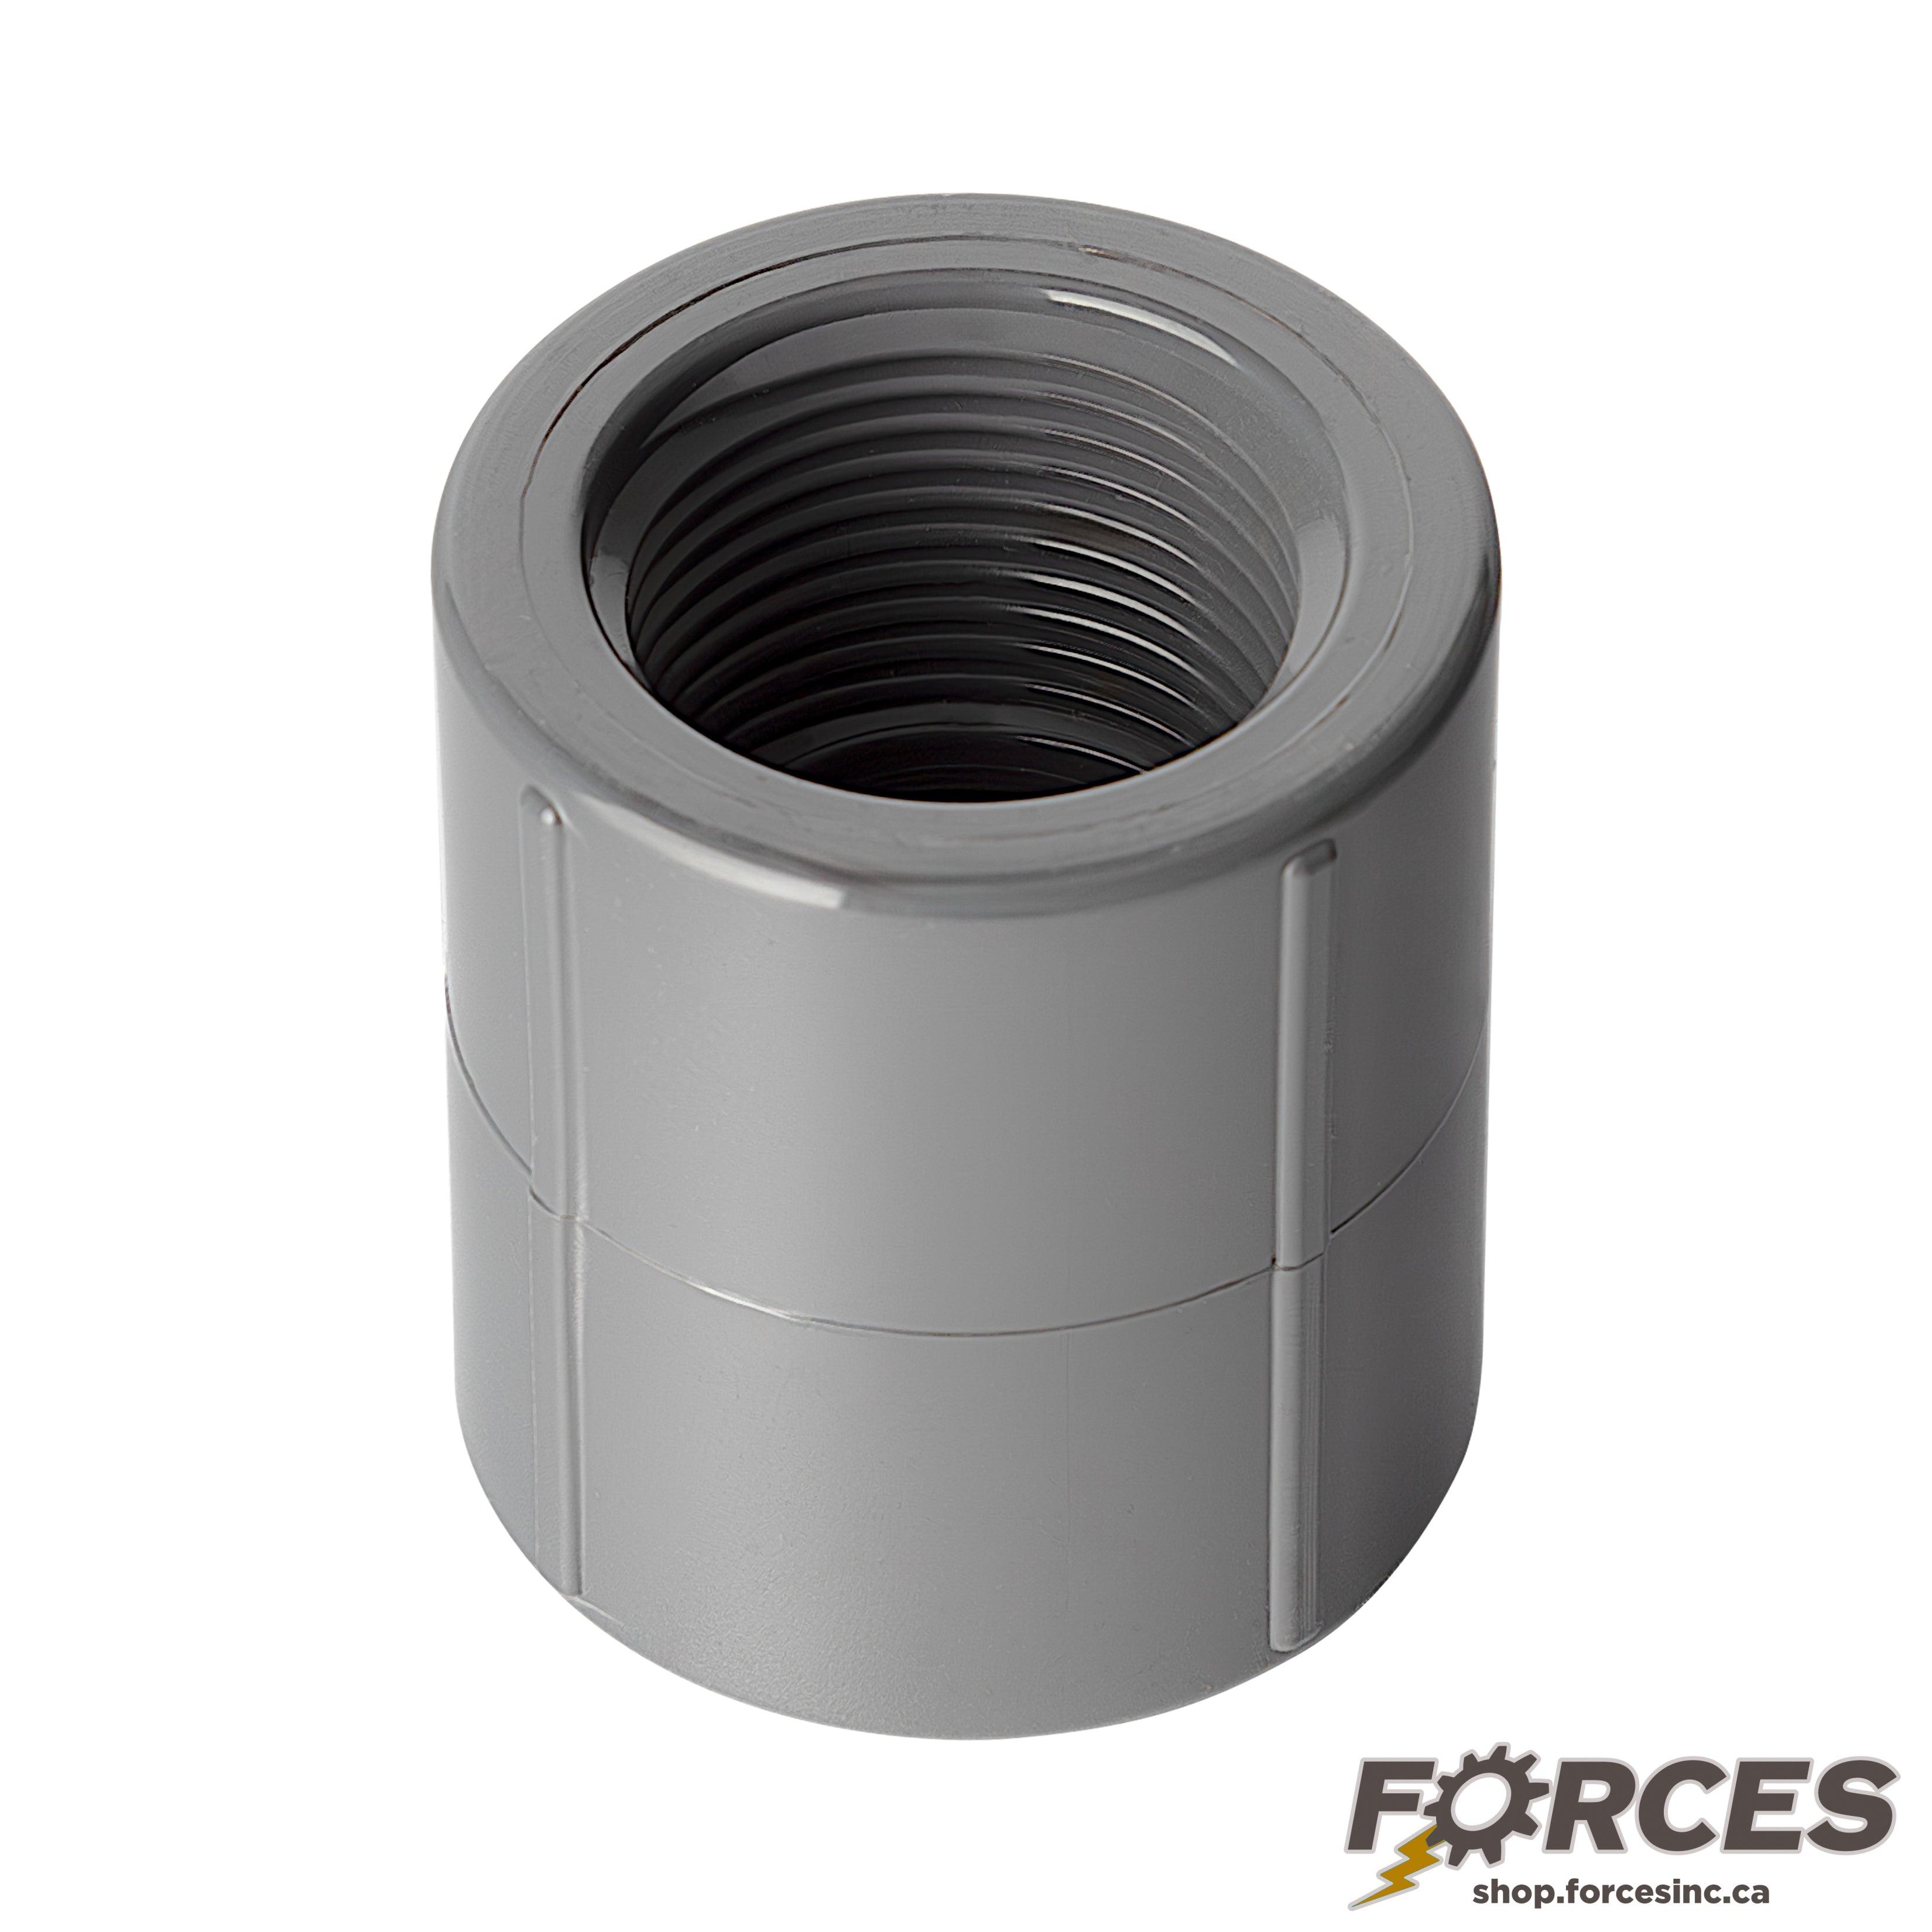 3/4" Coupling (Threaded) Sch 80 - PVC Grey | 830007 - Forces Inc